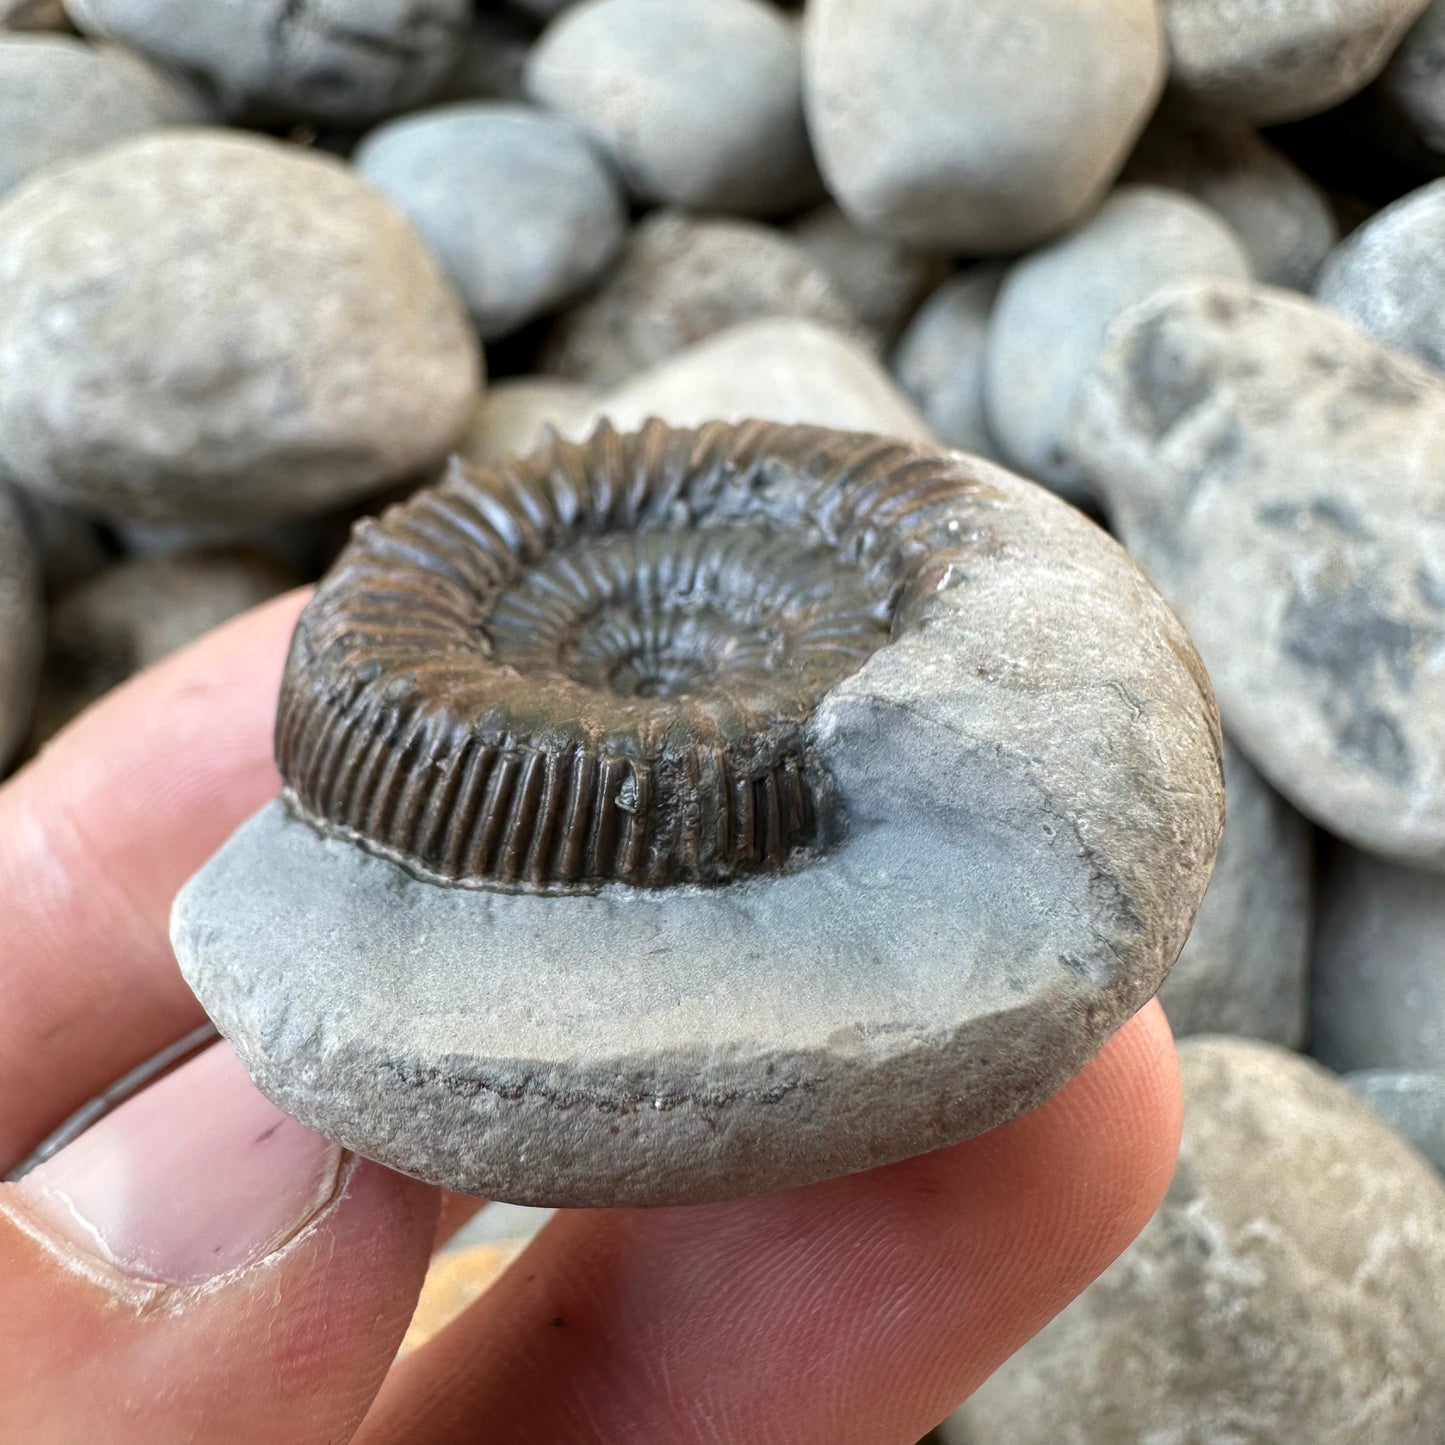 Catacoeloceras sp. ammonite fossil - Whitby, North Yorkshire